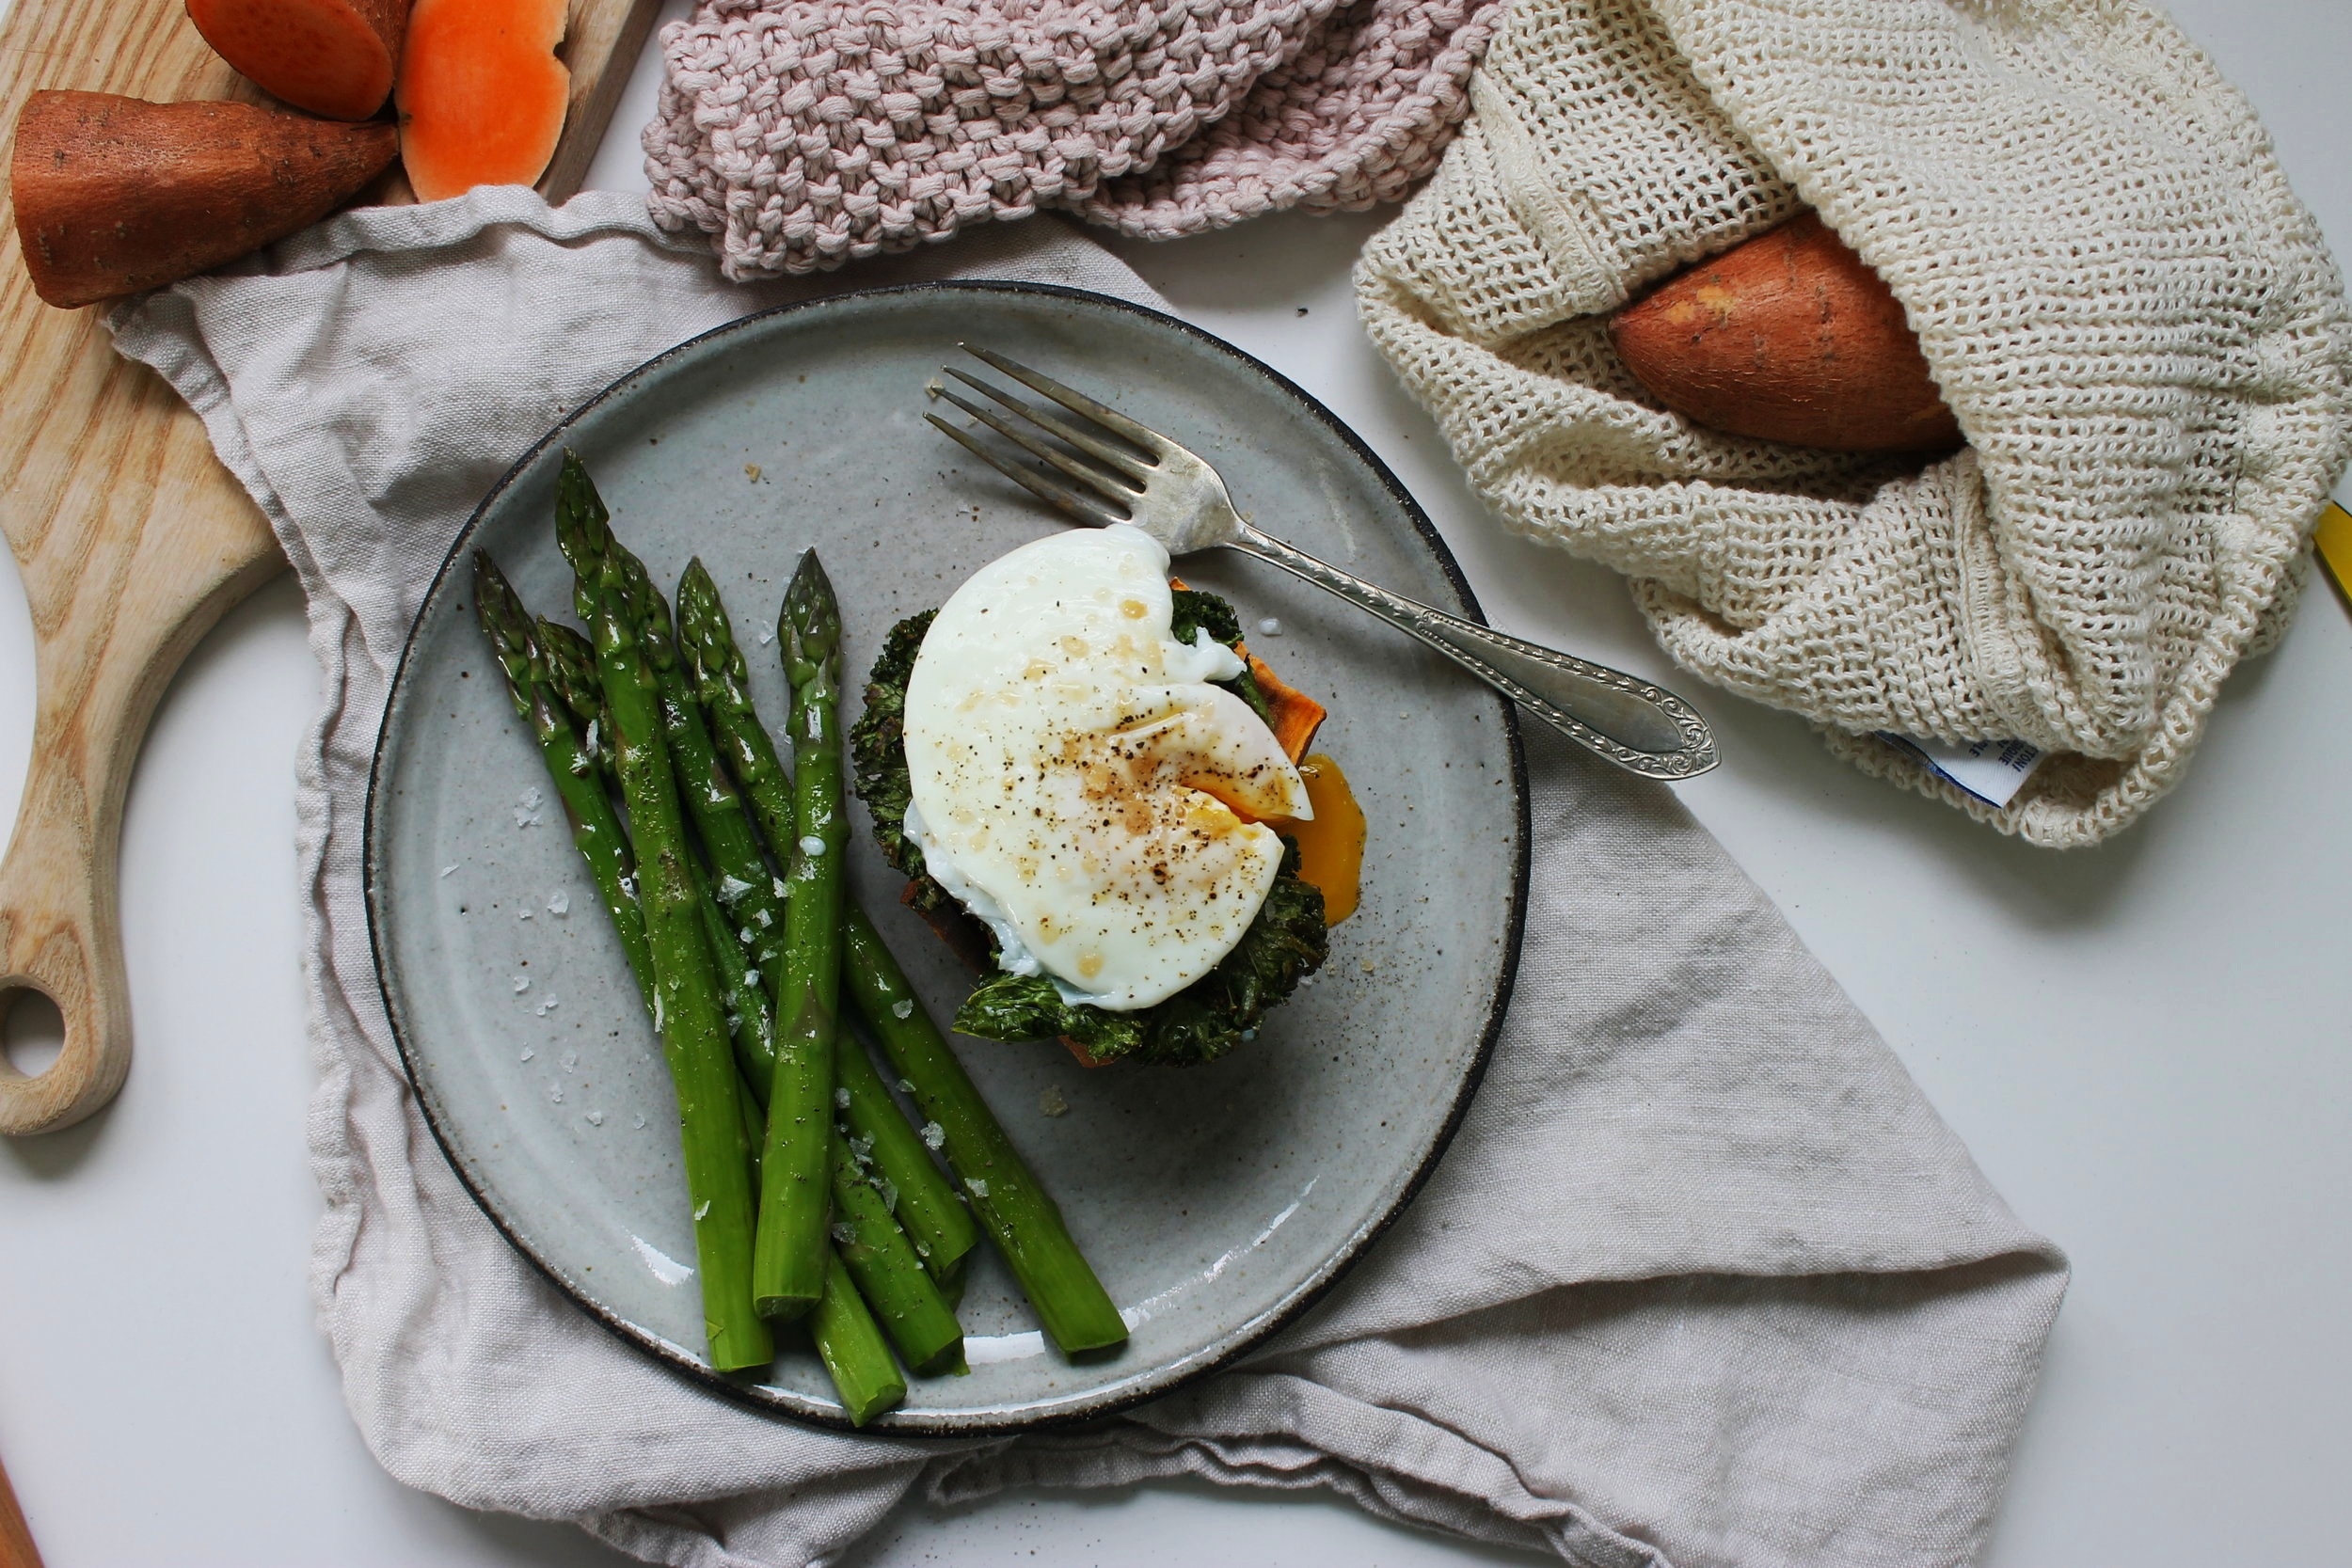 Sweet potato stacks with crispy kale and poached eggs | Beloved Kitchen